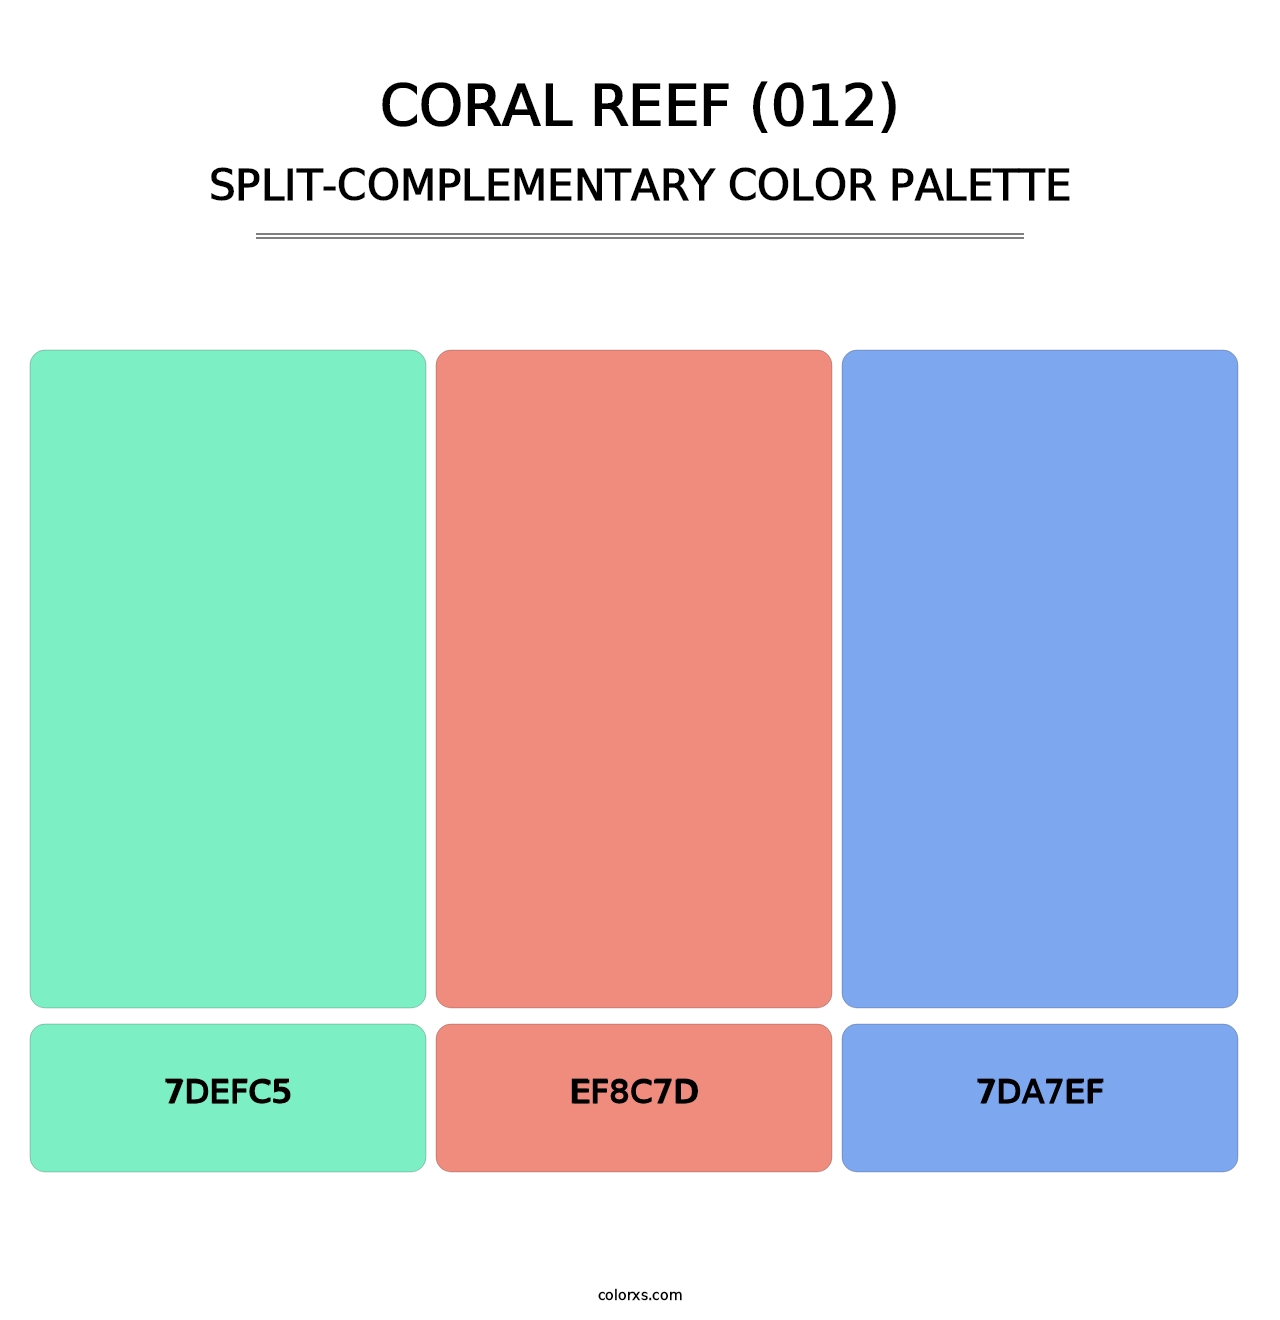 Coral Reef (012) - Split-Complementary Color Palette